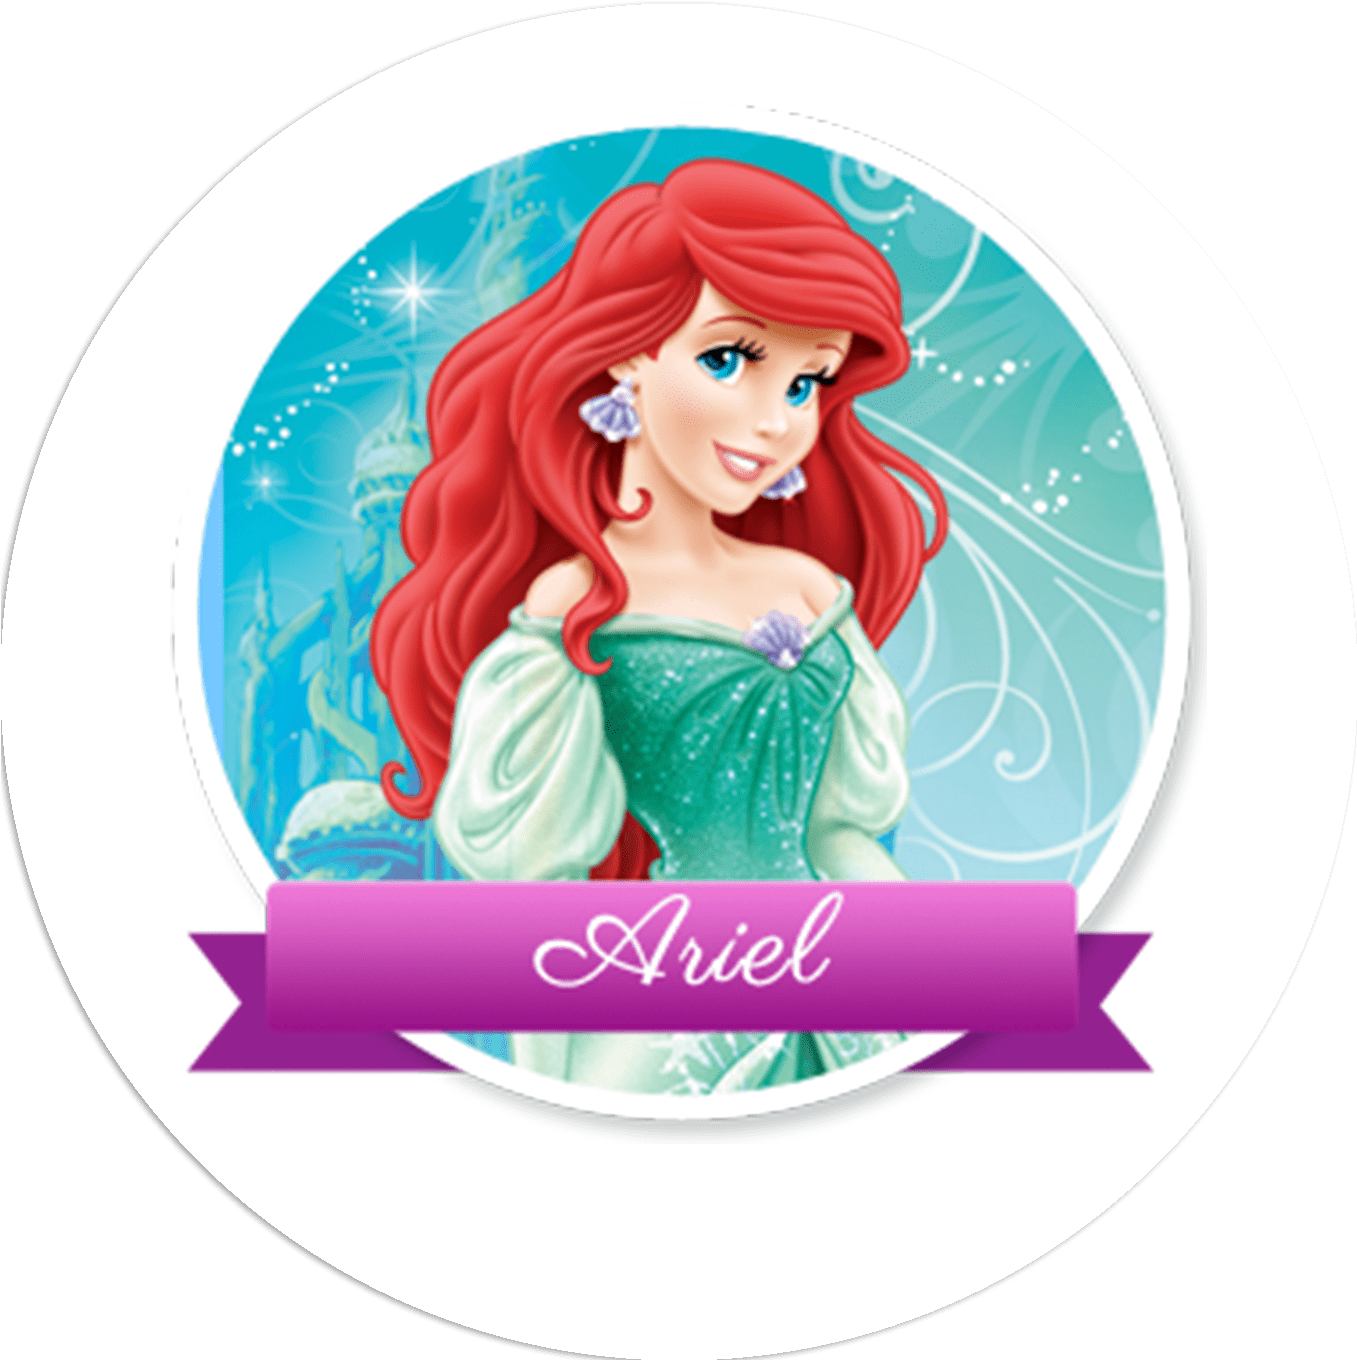 Ariel The Little Mermaid Graphic PNG image